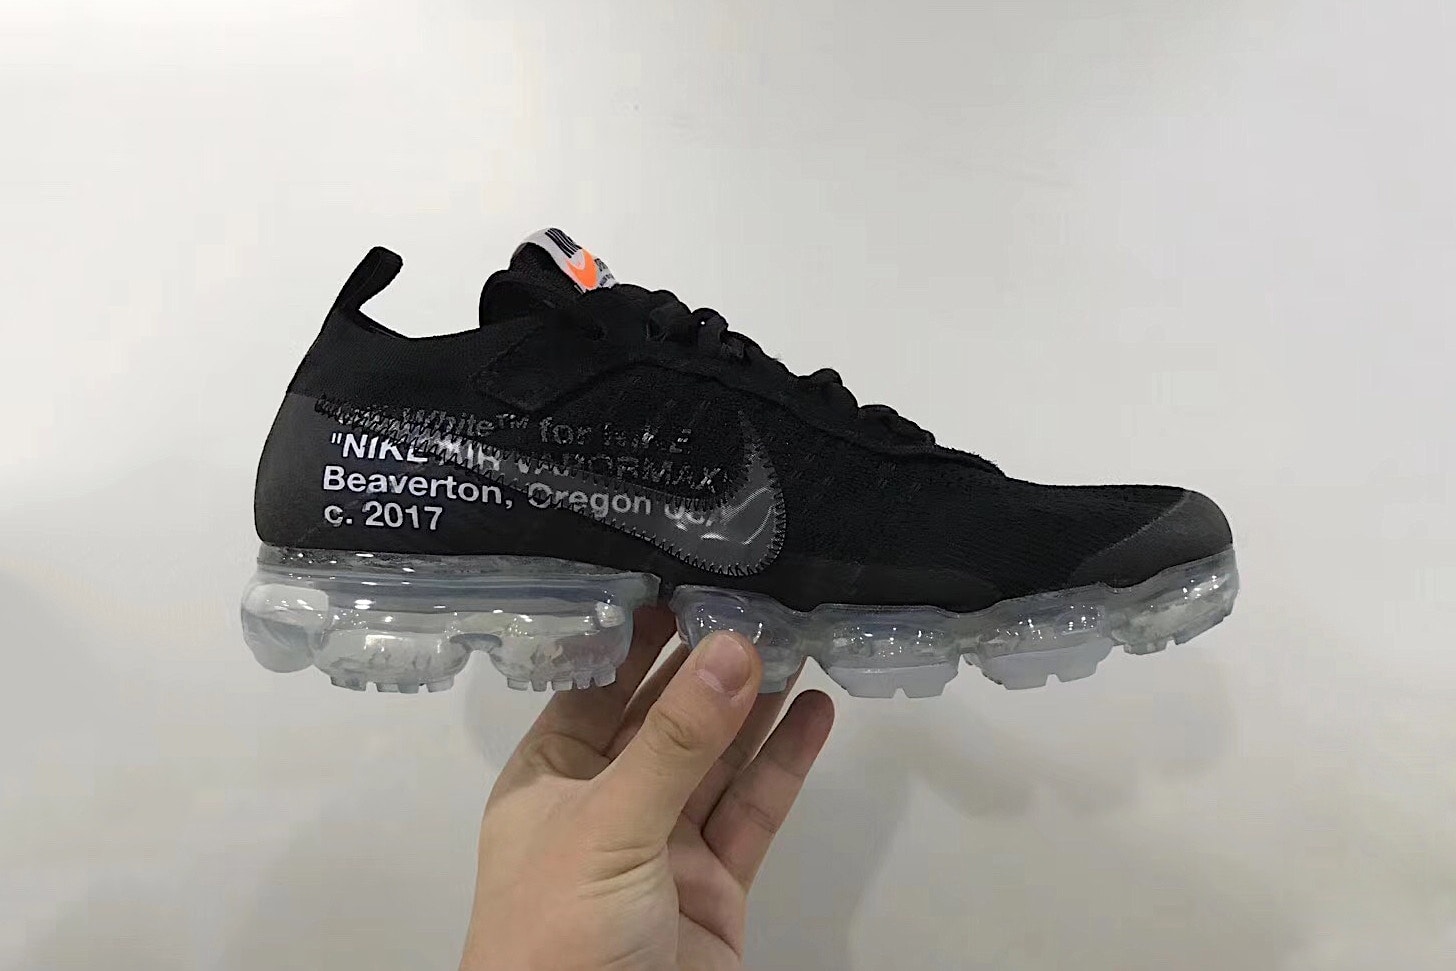 Off-White Virgil Abloh Nike Air VaporMax White Leaked Images First Look 2018